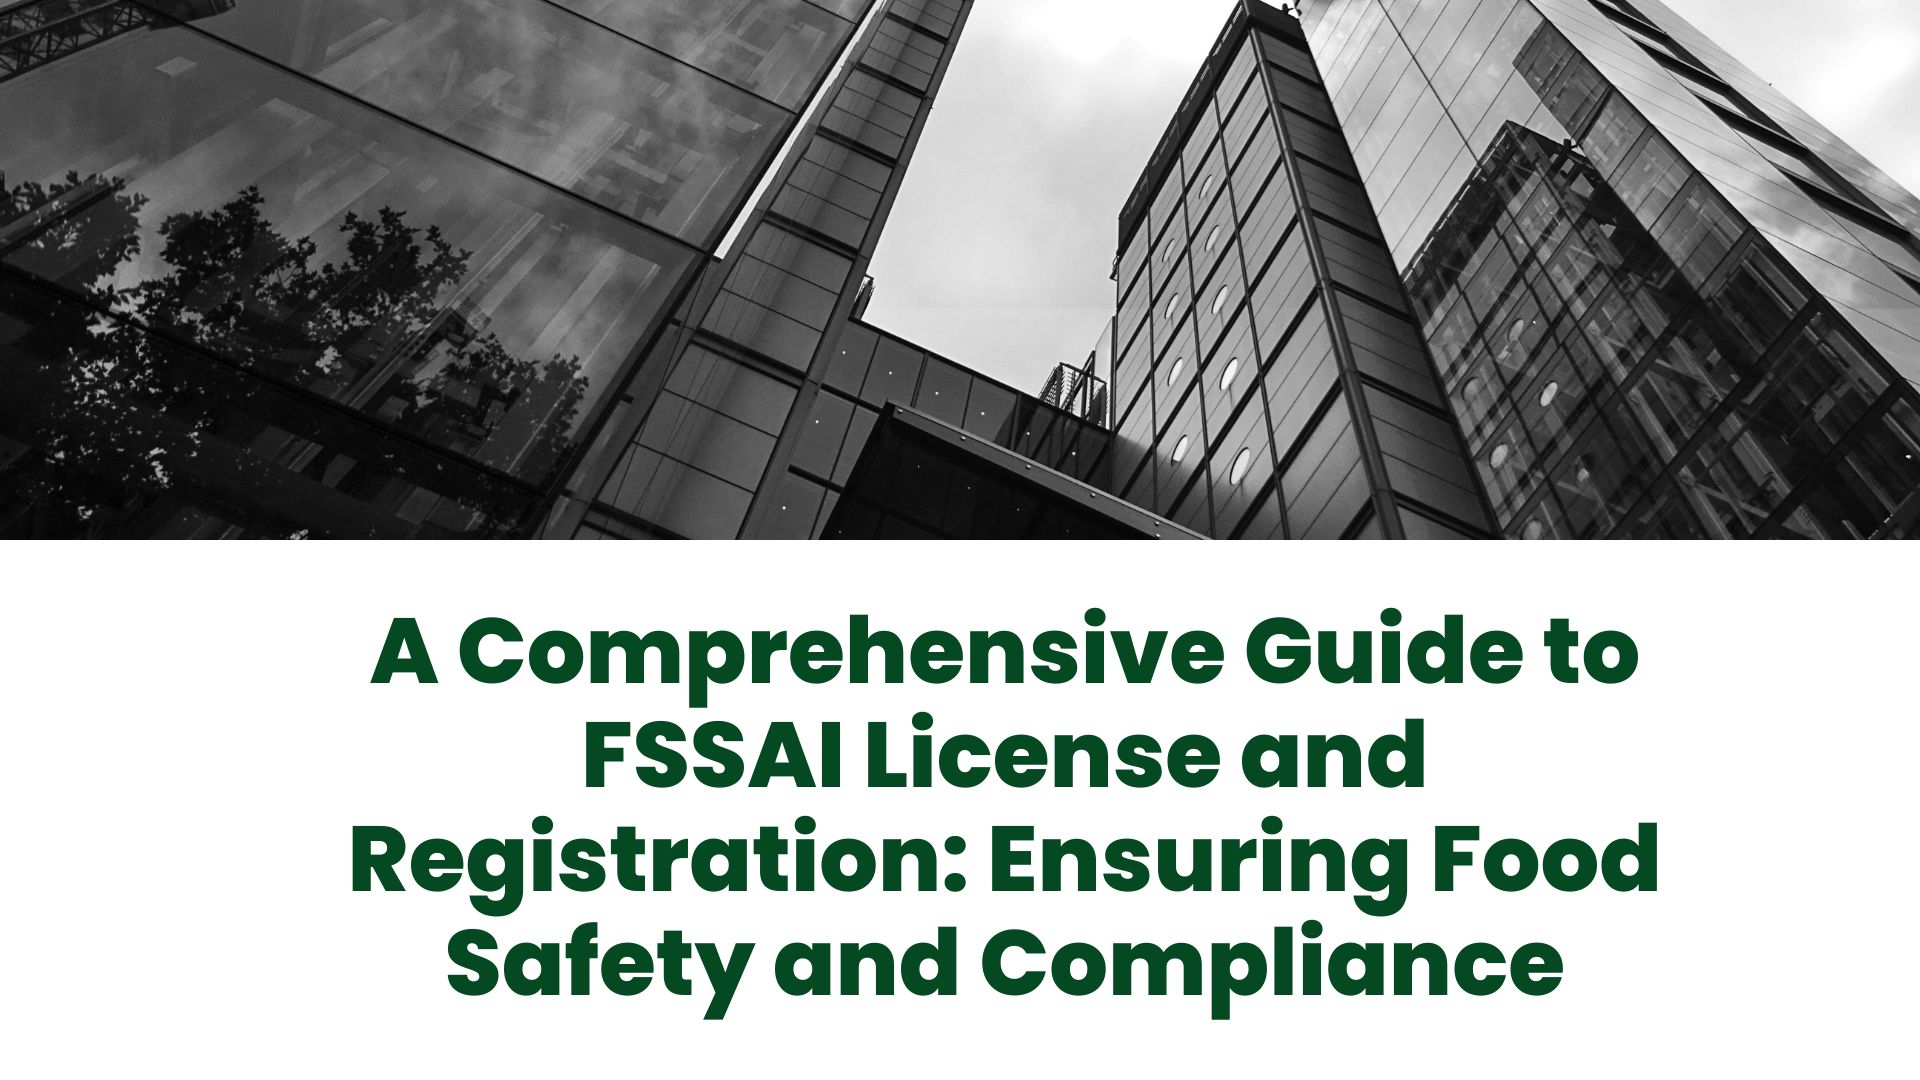 A Comprehensive Guide to FSSAI License and Registration: Ensuring Food Safety and Compliance